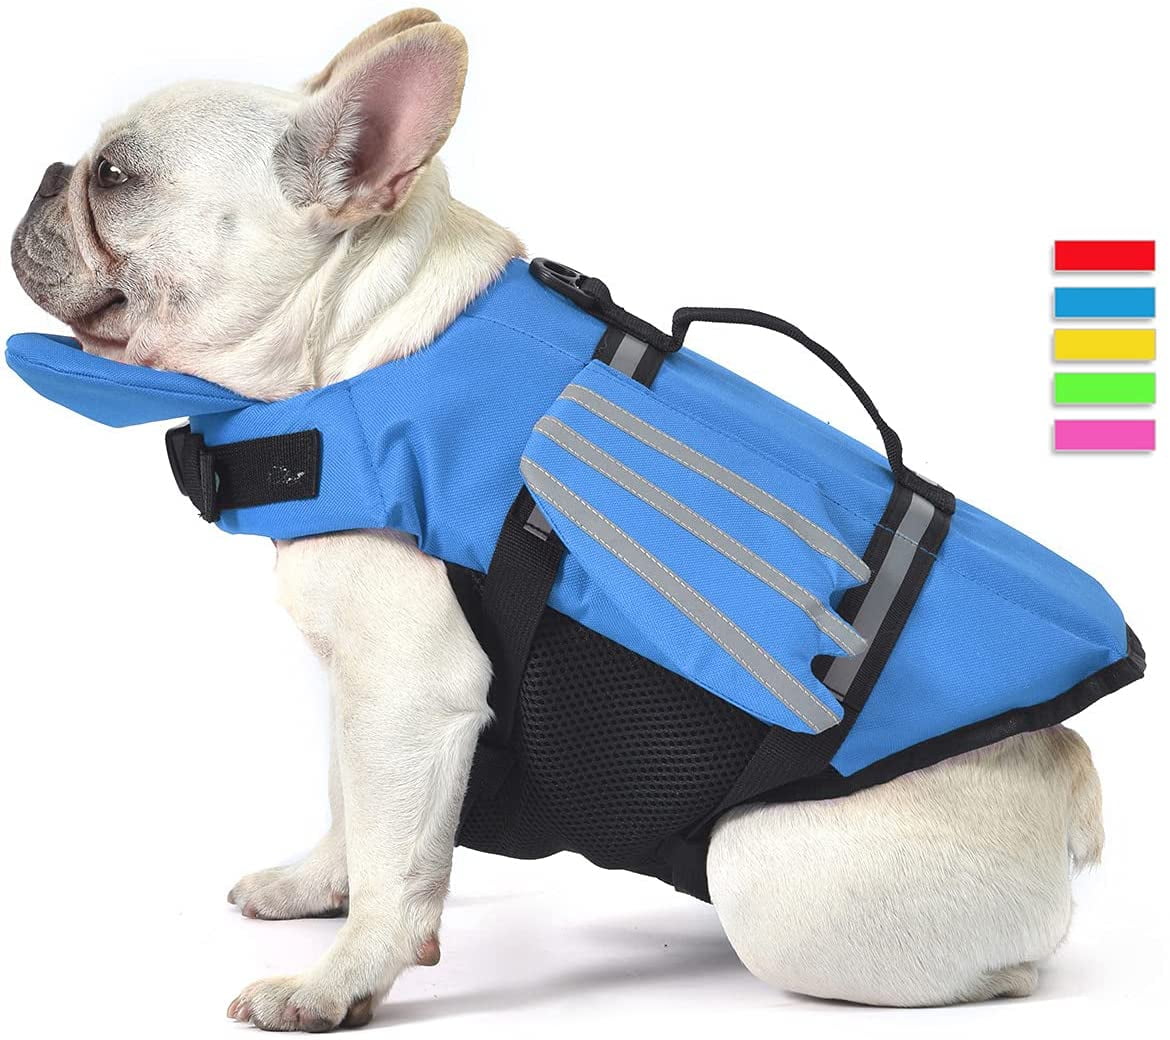 Pet Safety Swimsuit Preserver for Swimming Dog Life Jacket Lifesaver Vests with Rescue Handle for Small Medium and Large Dogs Beach Boating Mermaid Hot Pink Portable Dog Swimming Jacket Vest 